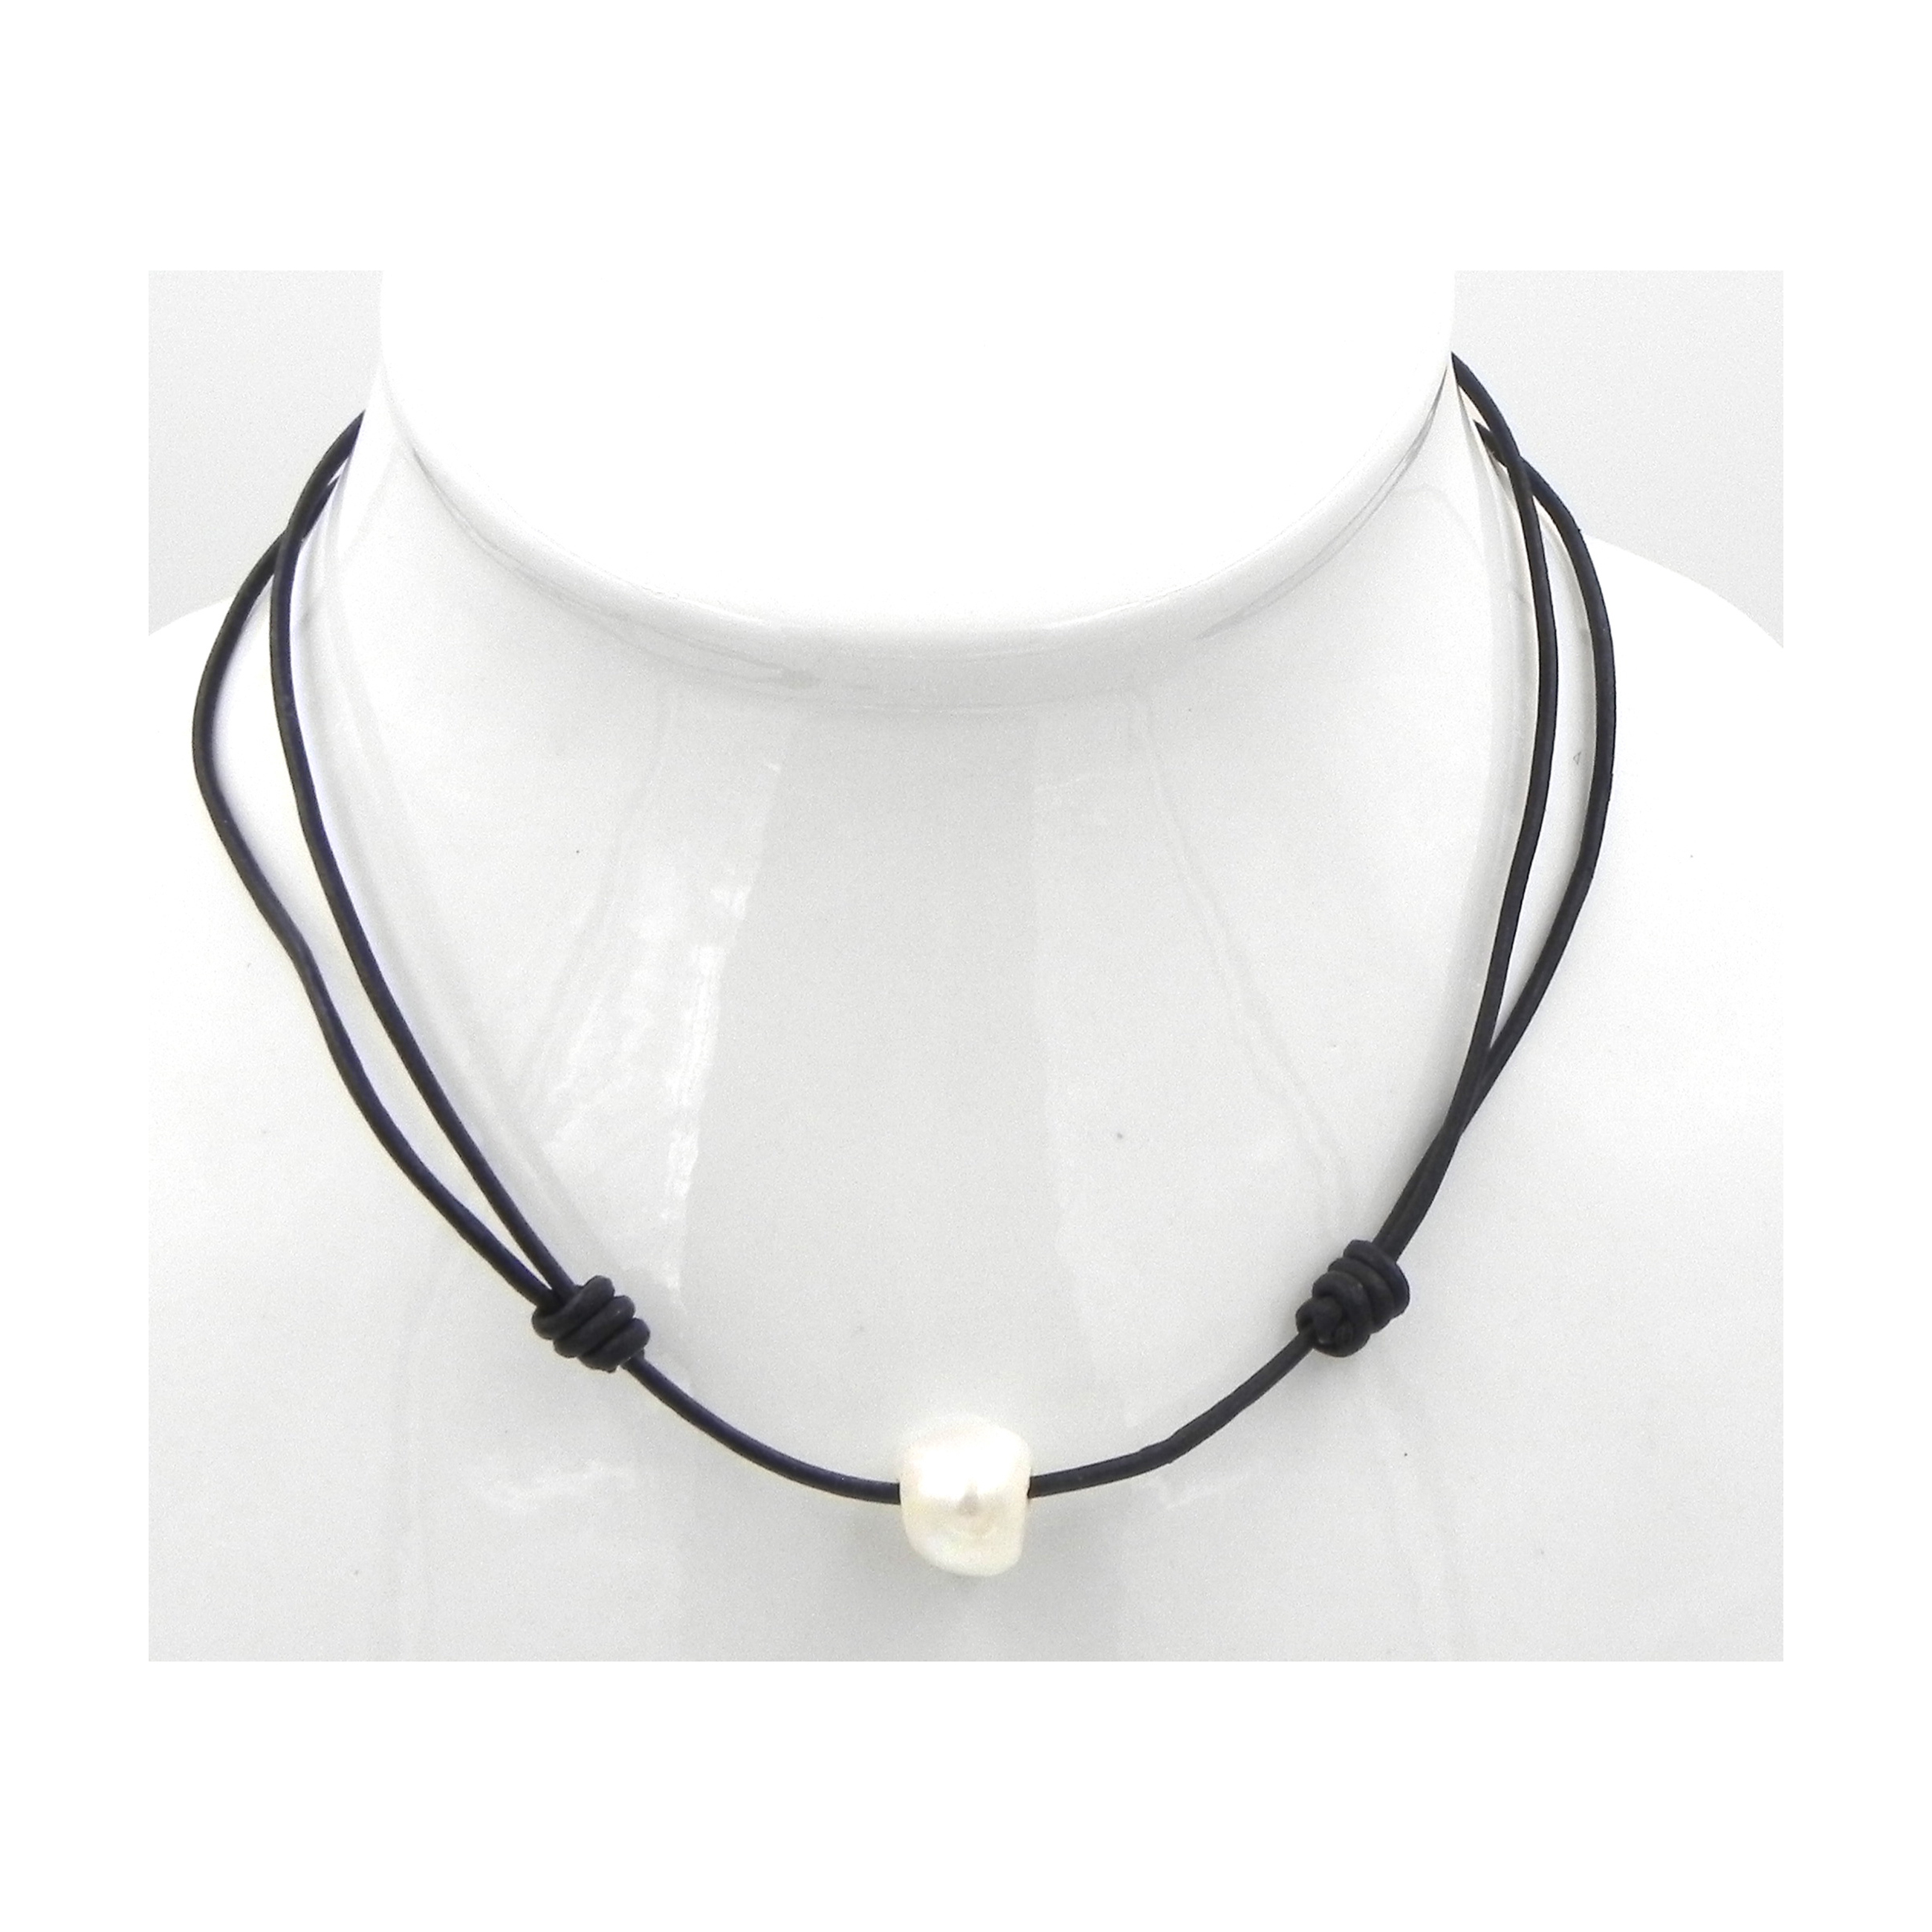 Single Baroque Pearl with Smooth Black Leather Adjustable Cord-A